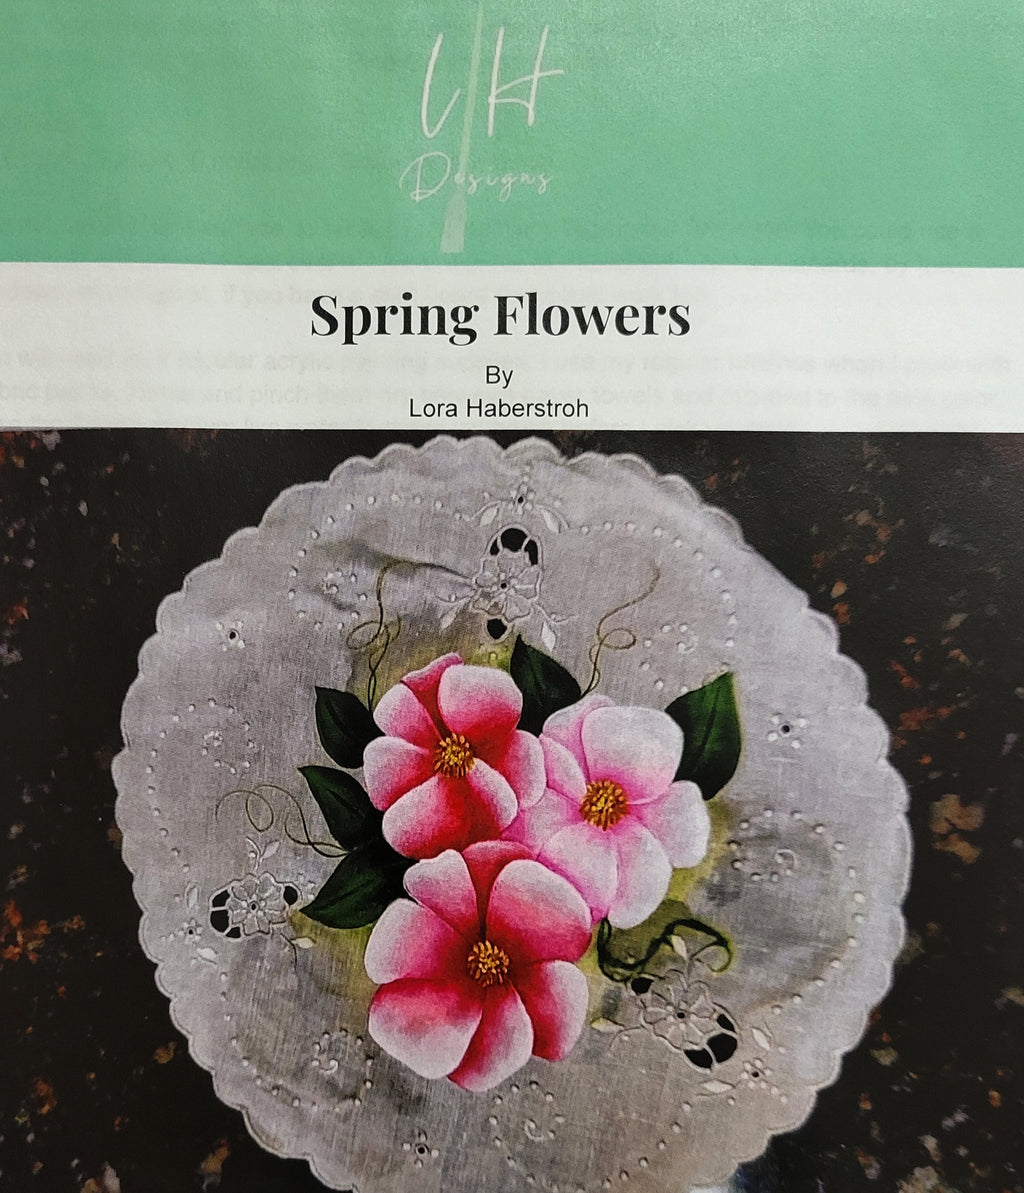 Spring Flowers packet by Lora Haberstroh